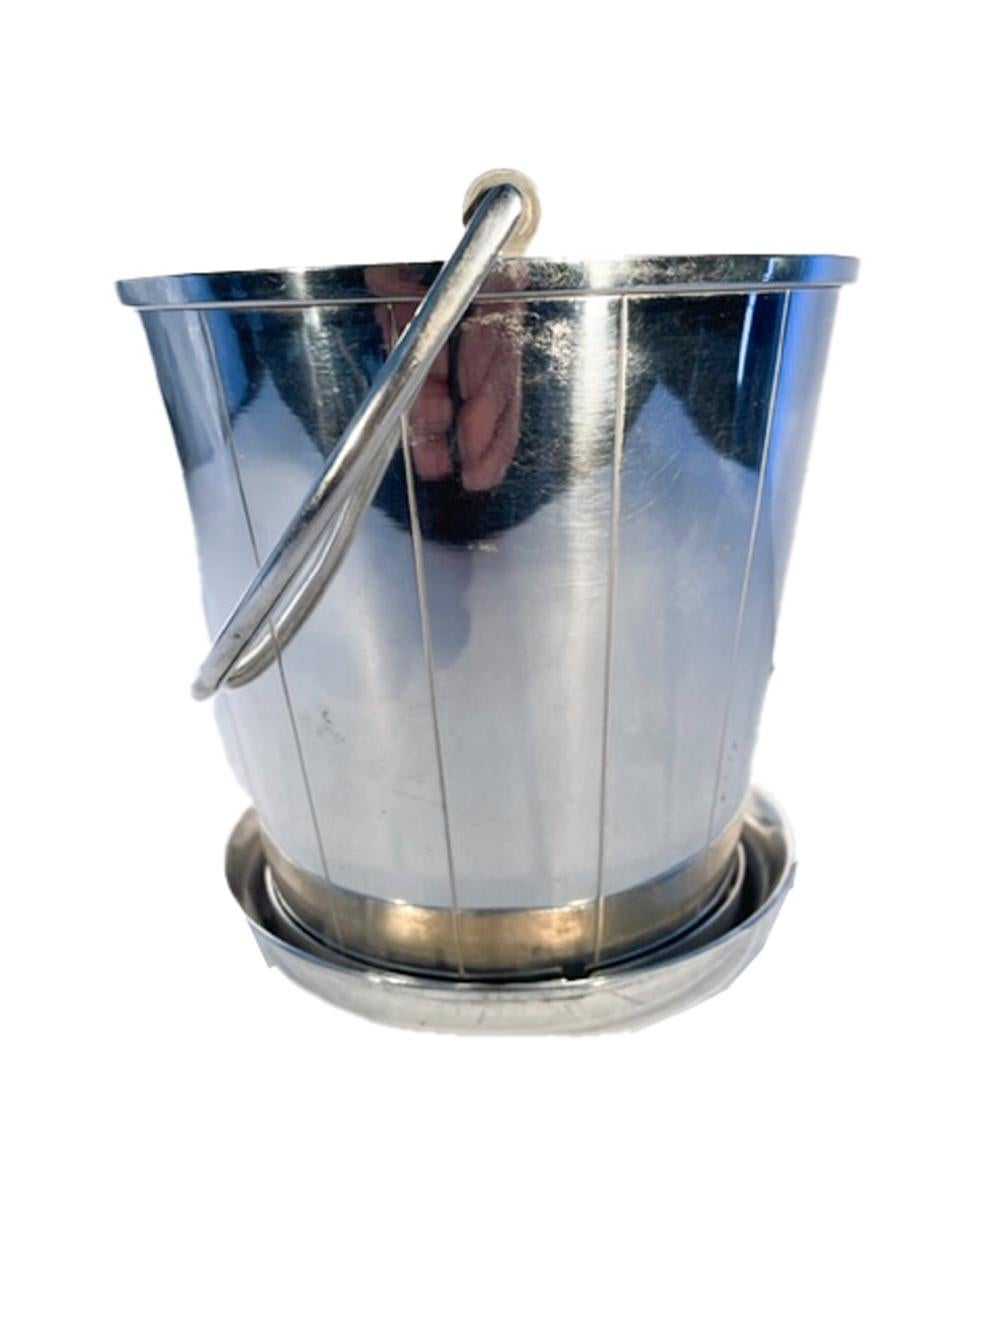 Unusual silver plate ice bucket of pail form with swing handle and incised vertical lines. There is an interior pierced drain plate to hold the ice above water as well as an unusual detachable saucer which is held in place using a twist-lock